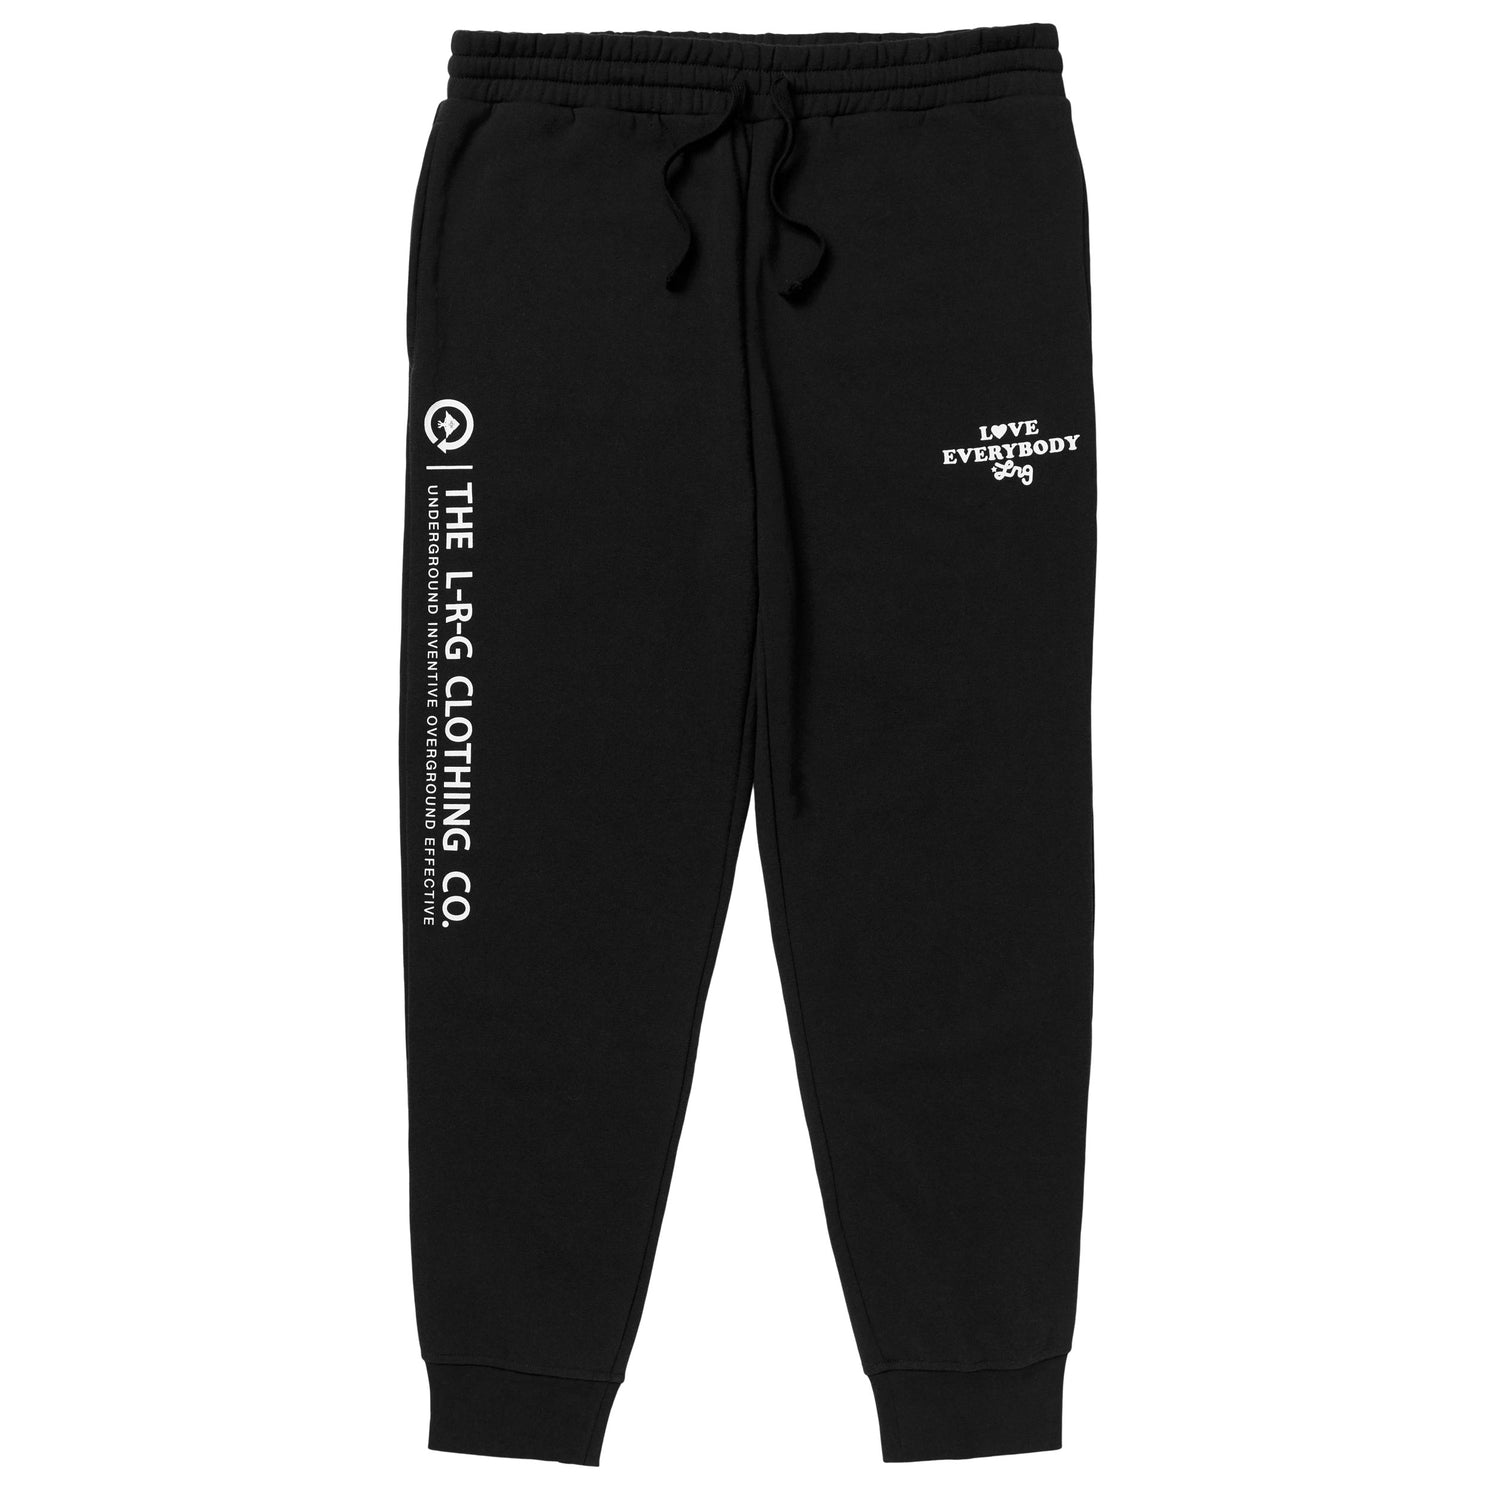 LOVE FOR EVERYBODY JOGGER SWEATPANTS - BLACK